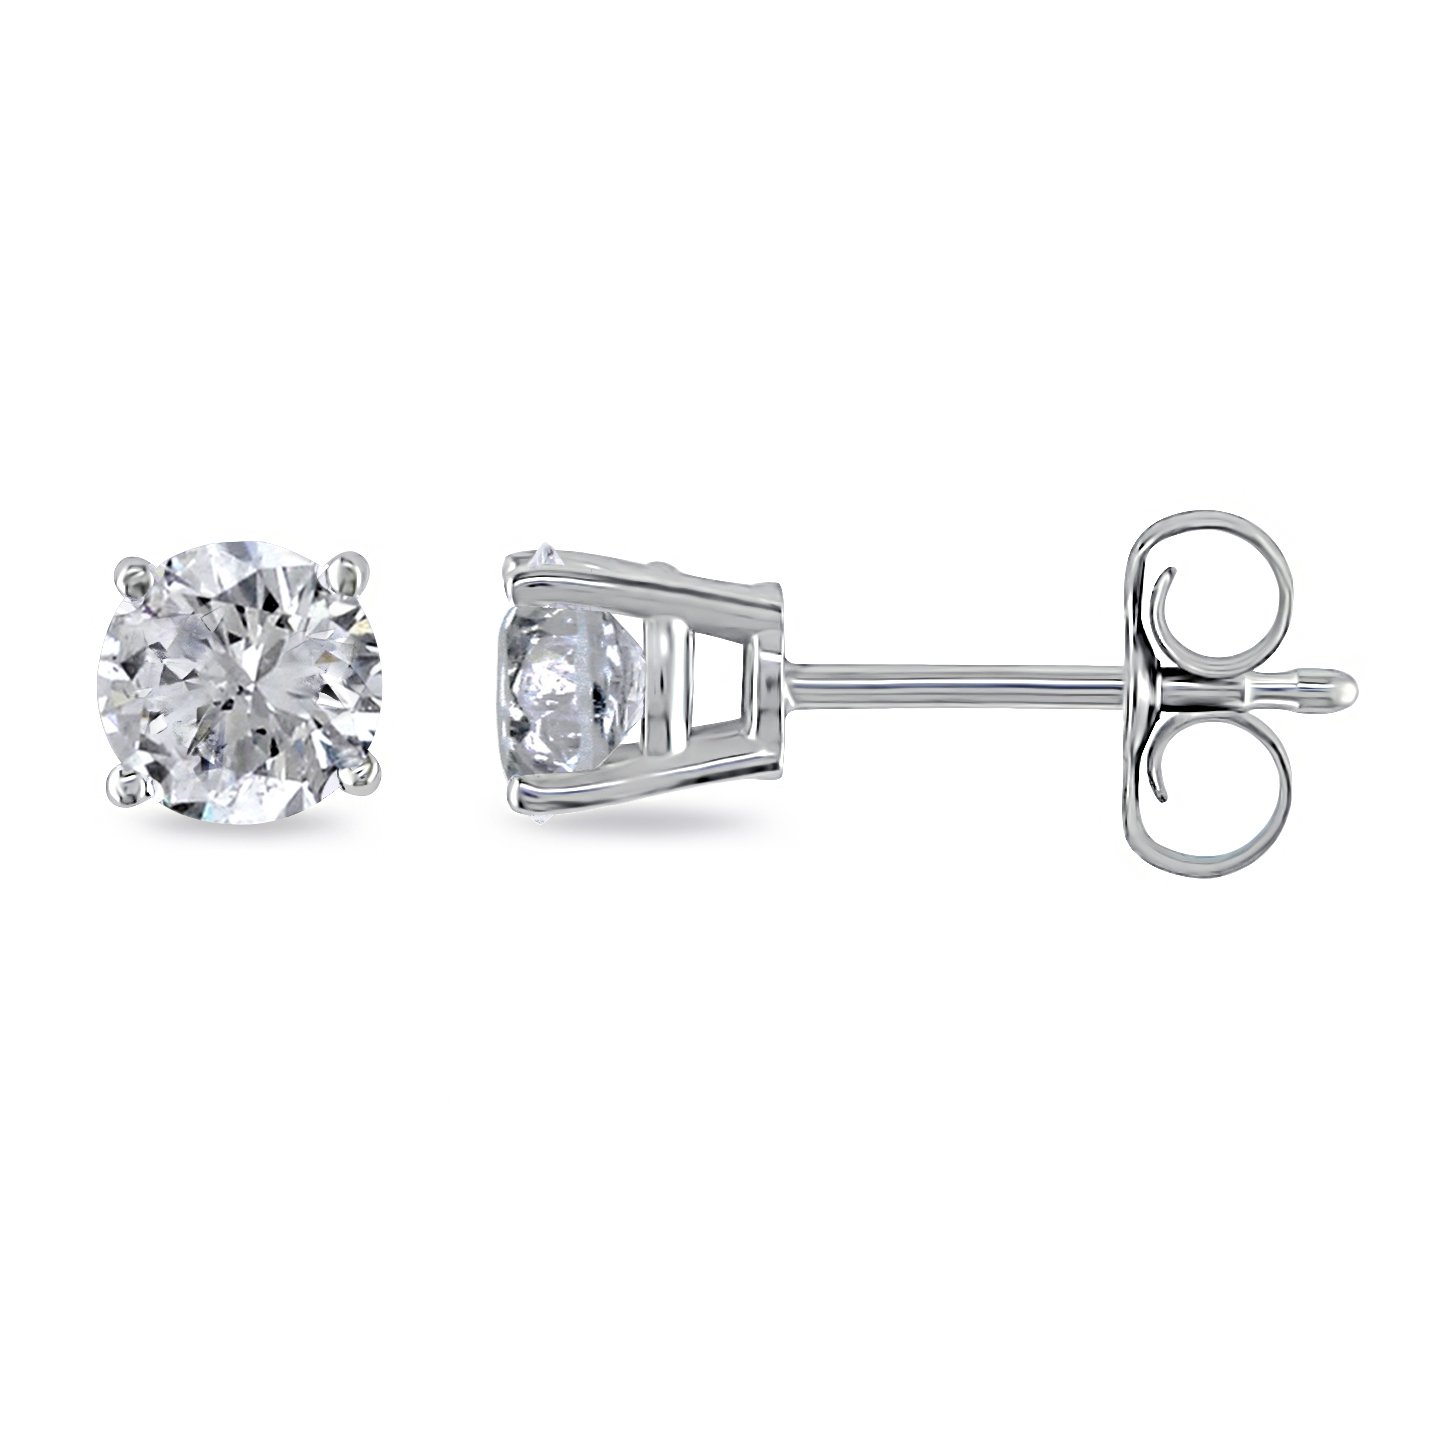 3/4 CT Solitaire Earrings Traditional-Basket Set in 14K White Gold (H-I I2-I3)